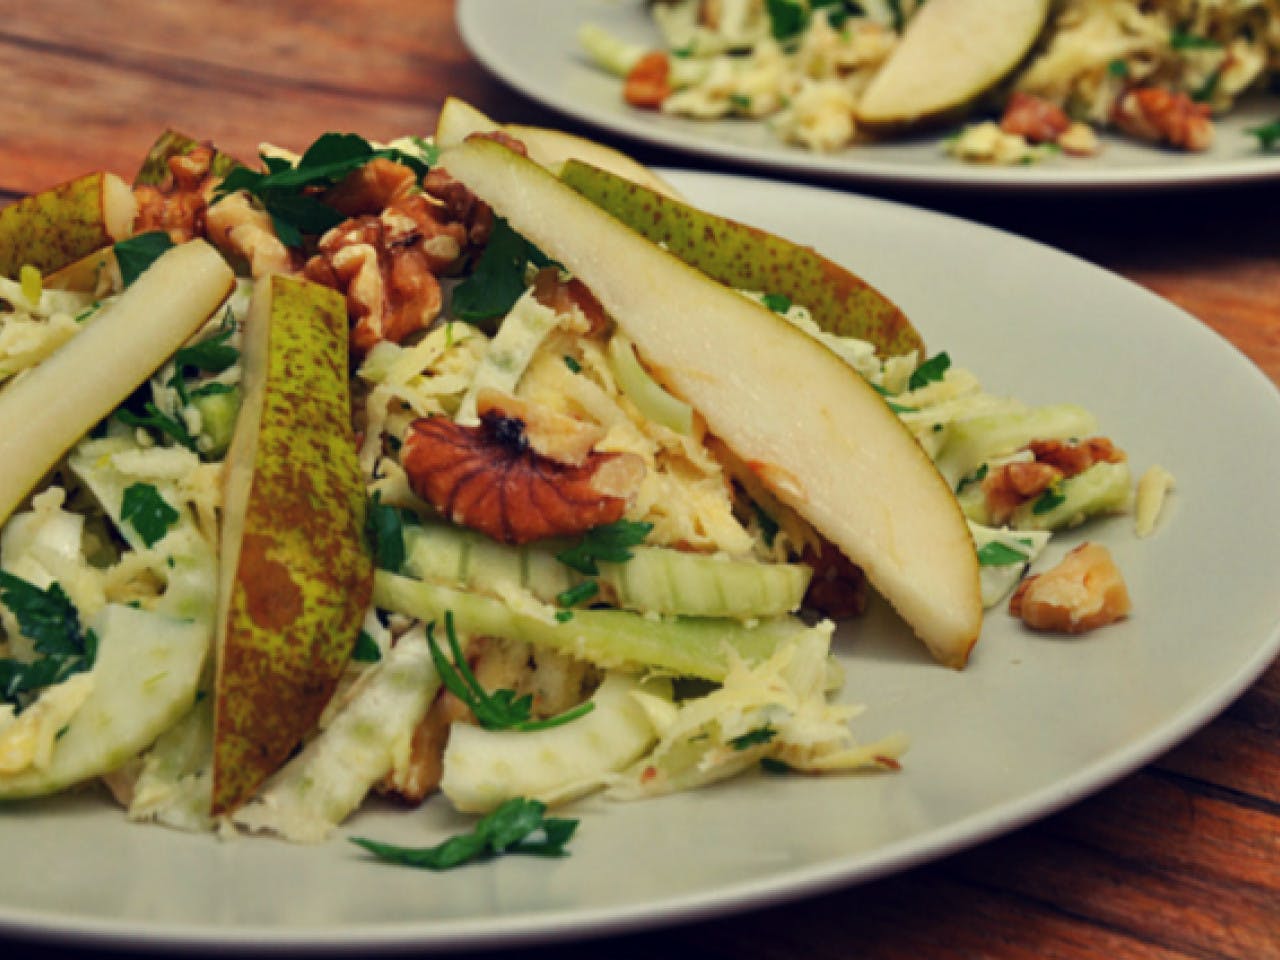 Pear salad with walnut and parsnip